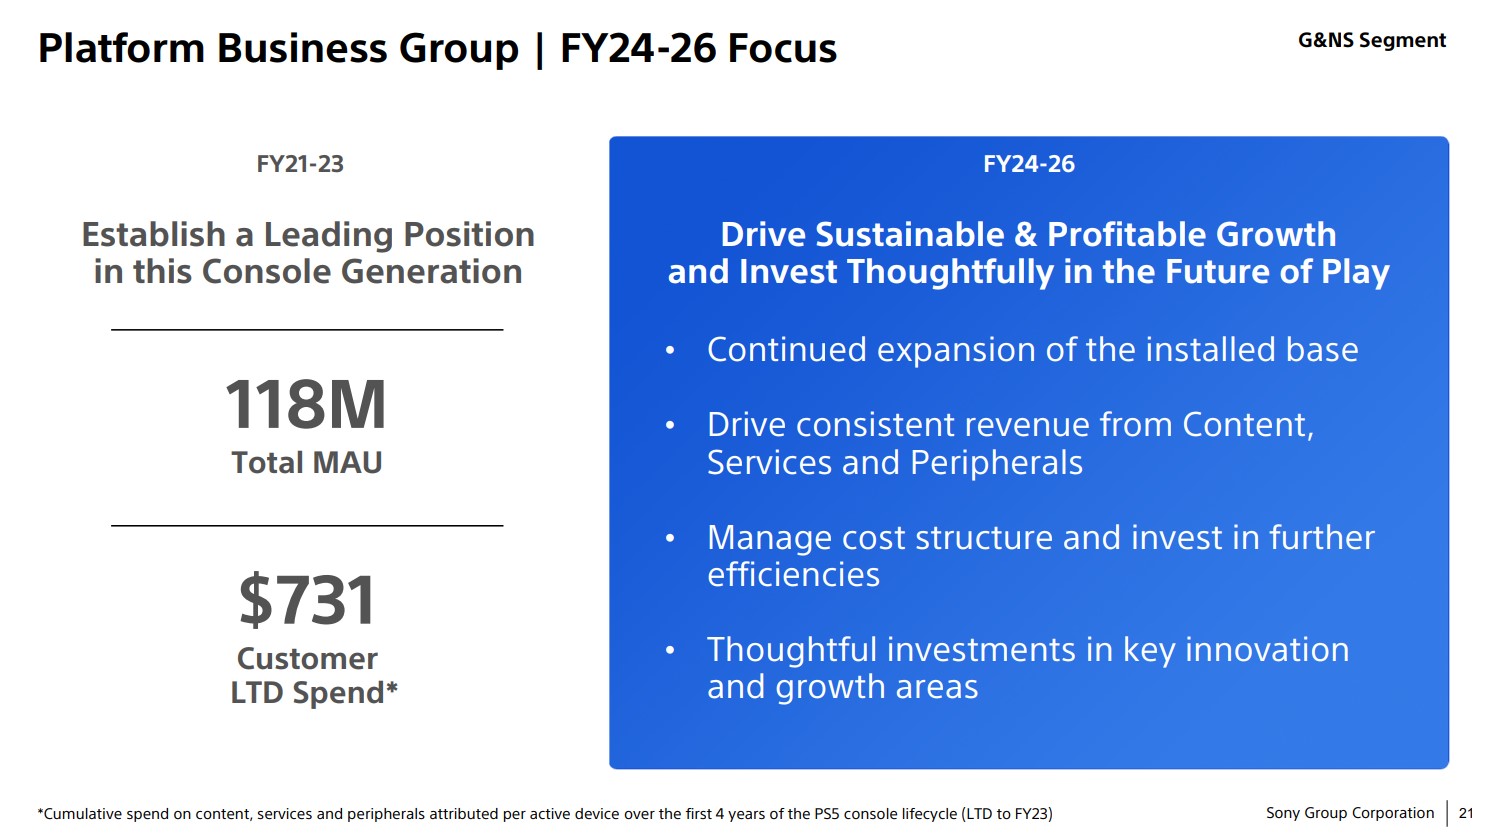 Sony Interactive Entertainment Platform Business Group Targets for 2024 to 2026